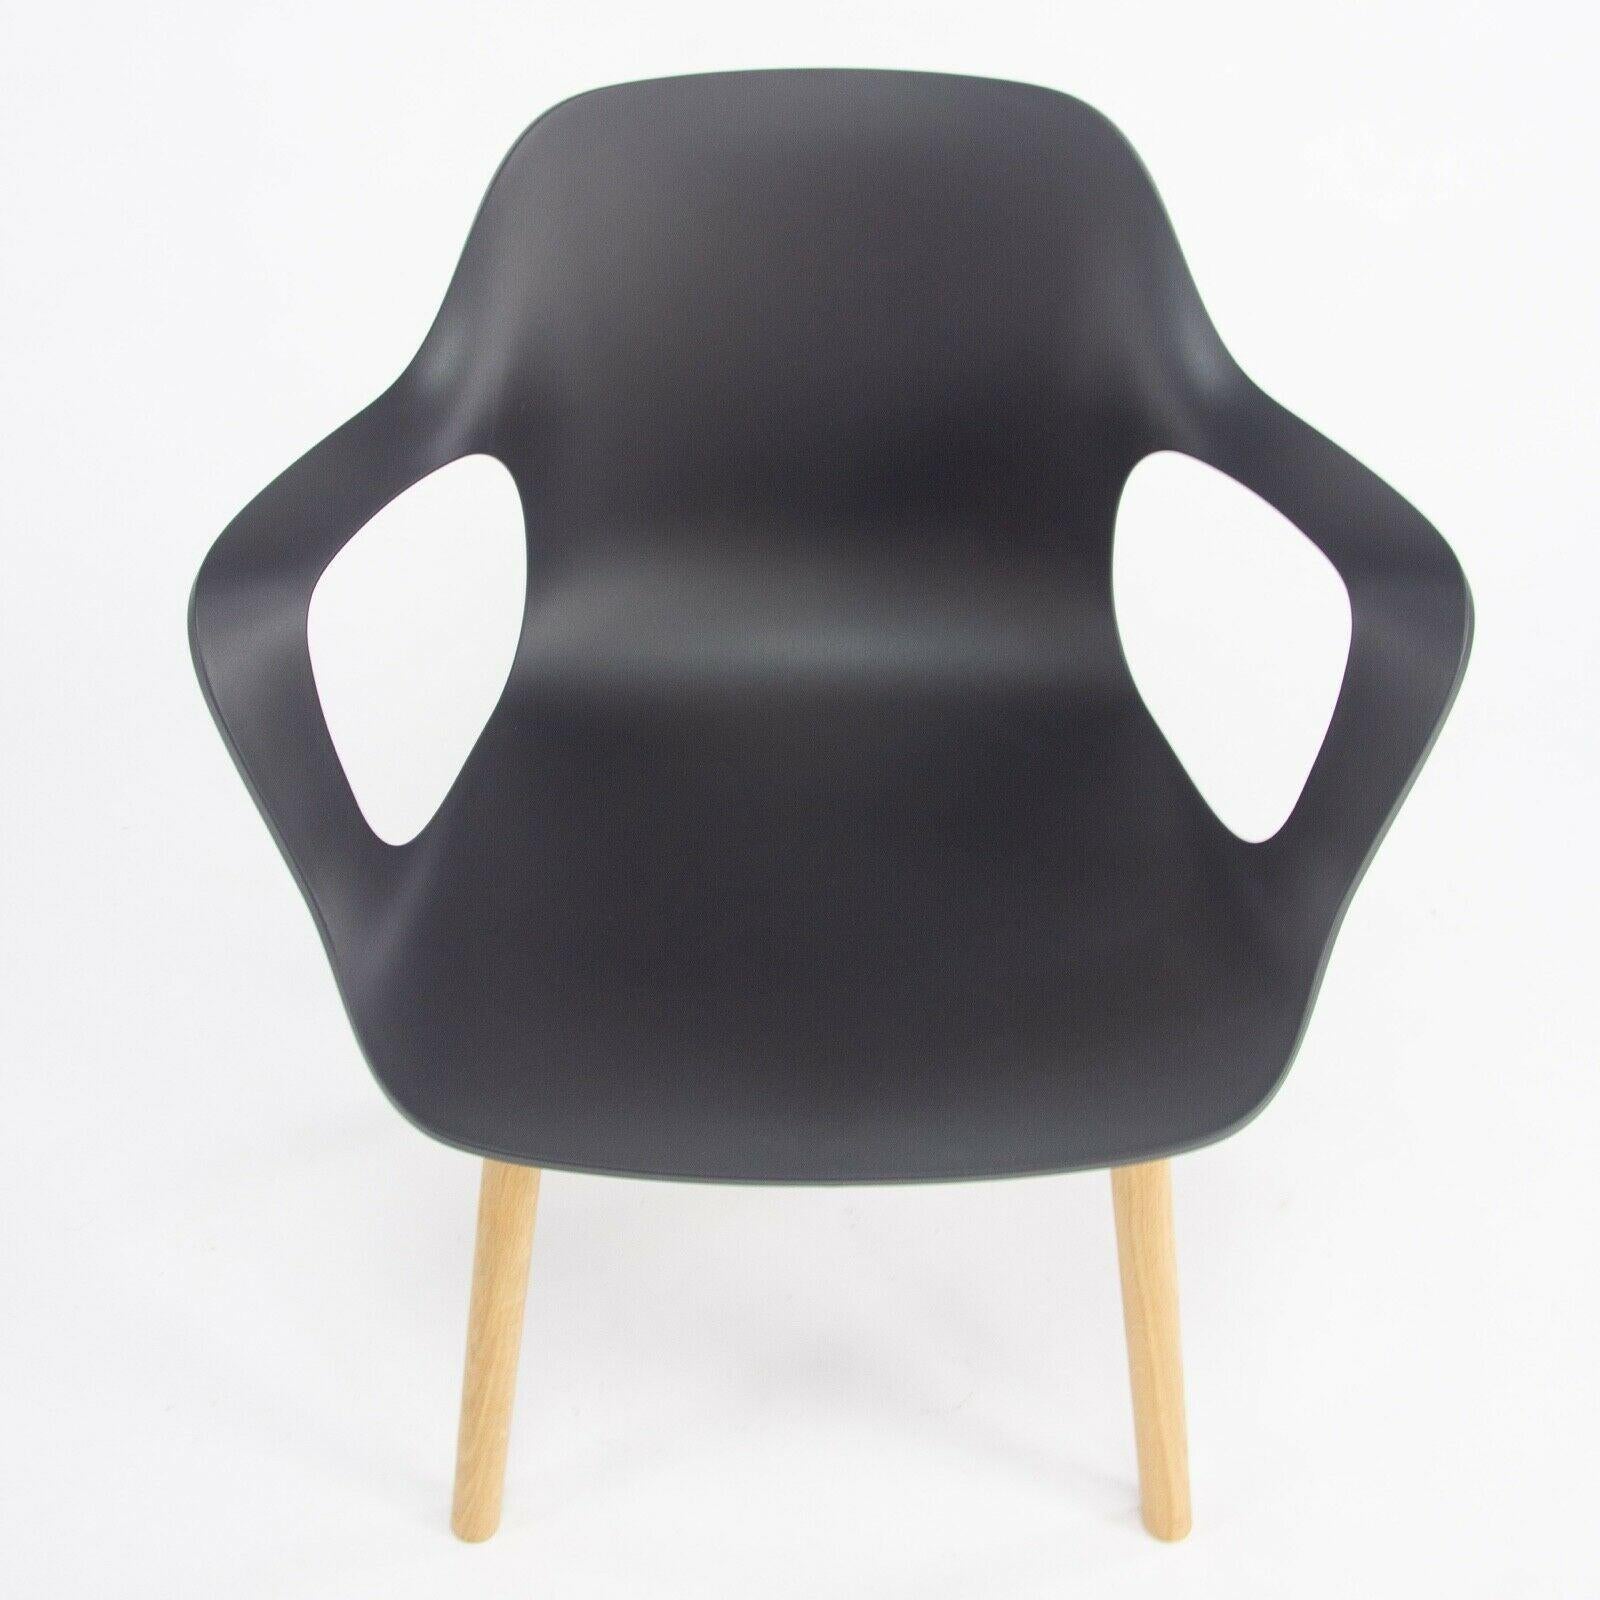 2018 Jasper Morrison for Vitra HAL Armchair with Black Seat and Oak Wood Legs For Sale 2